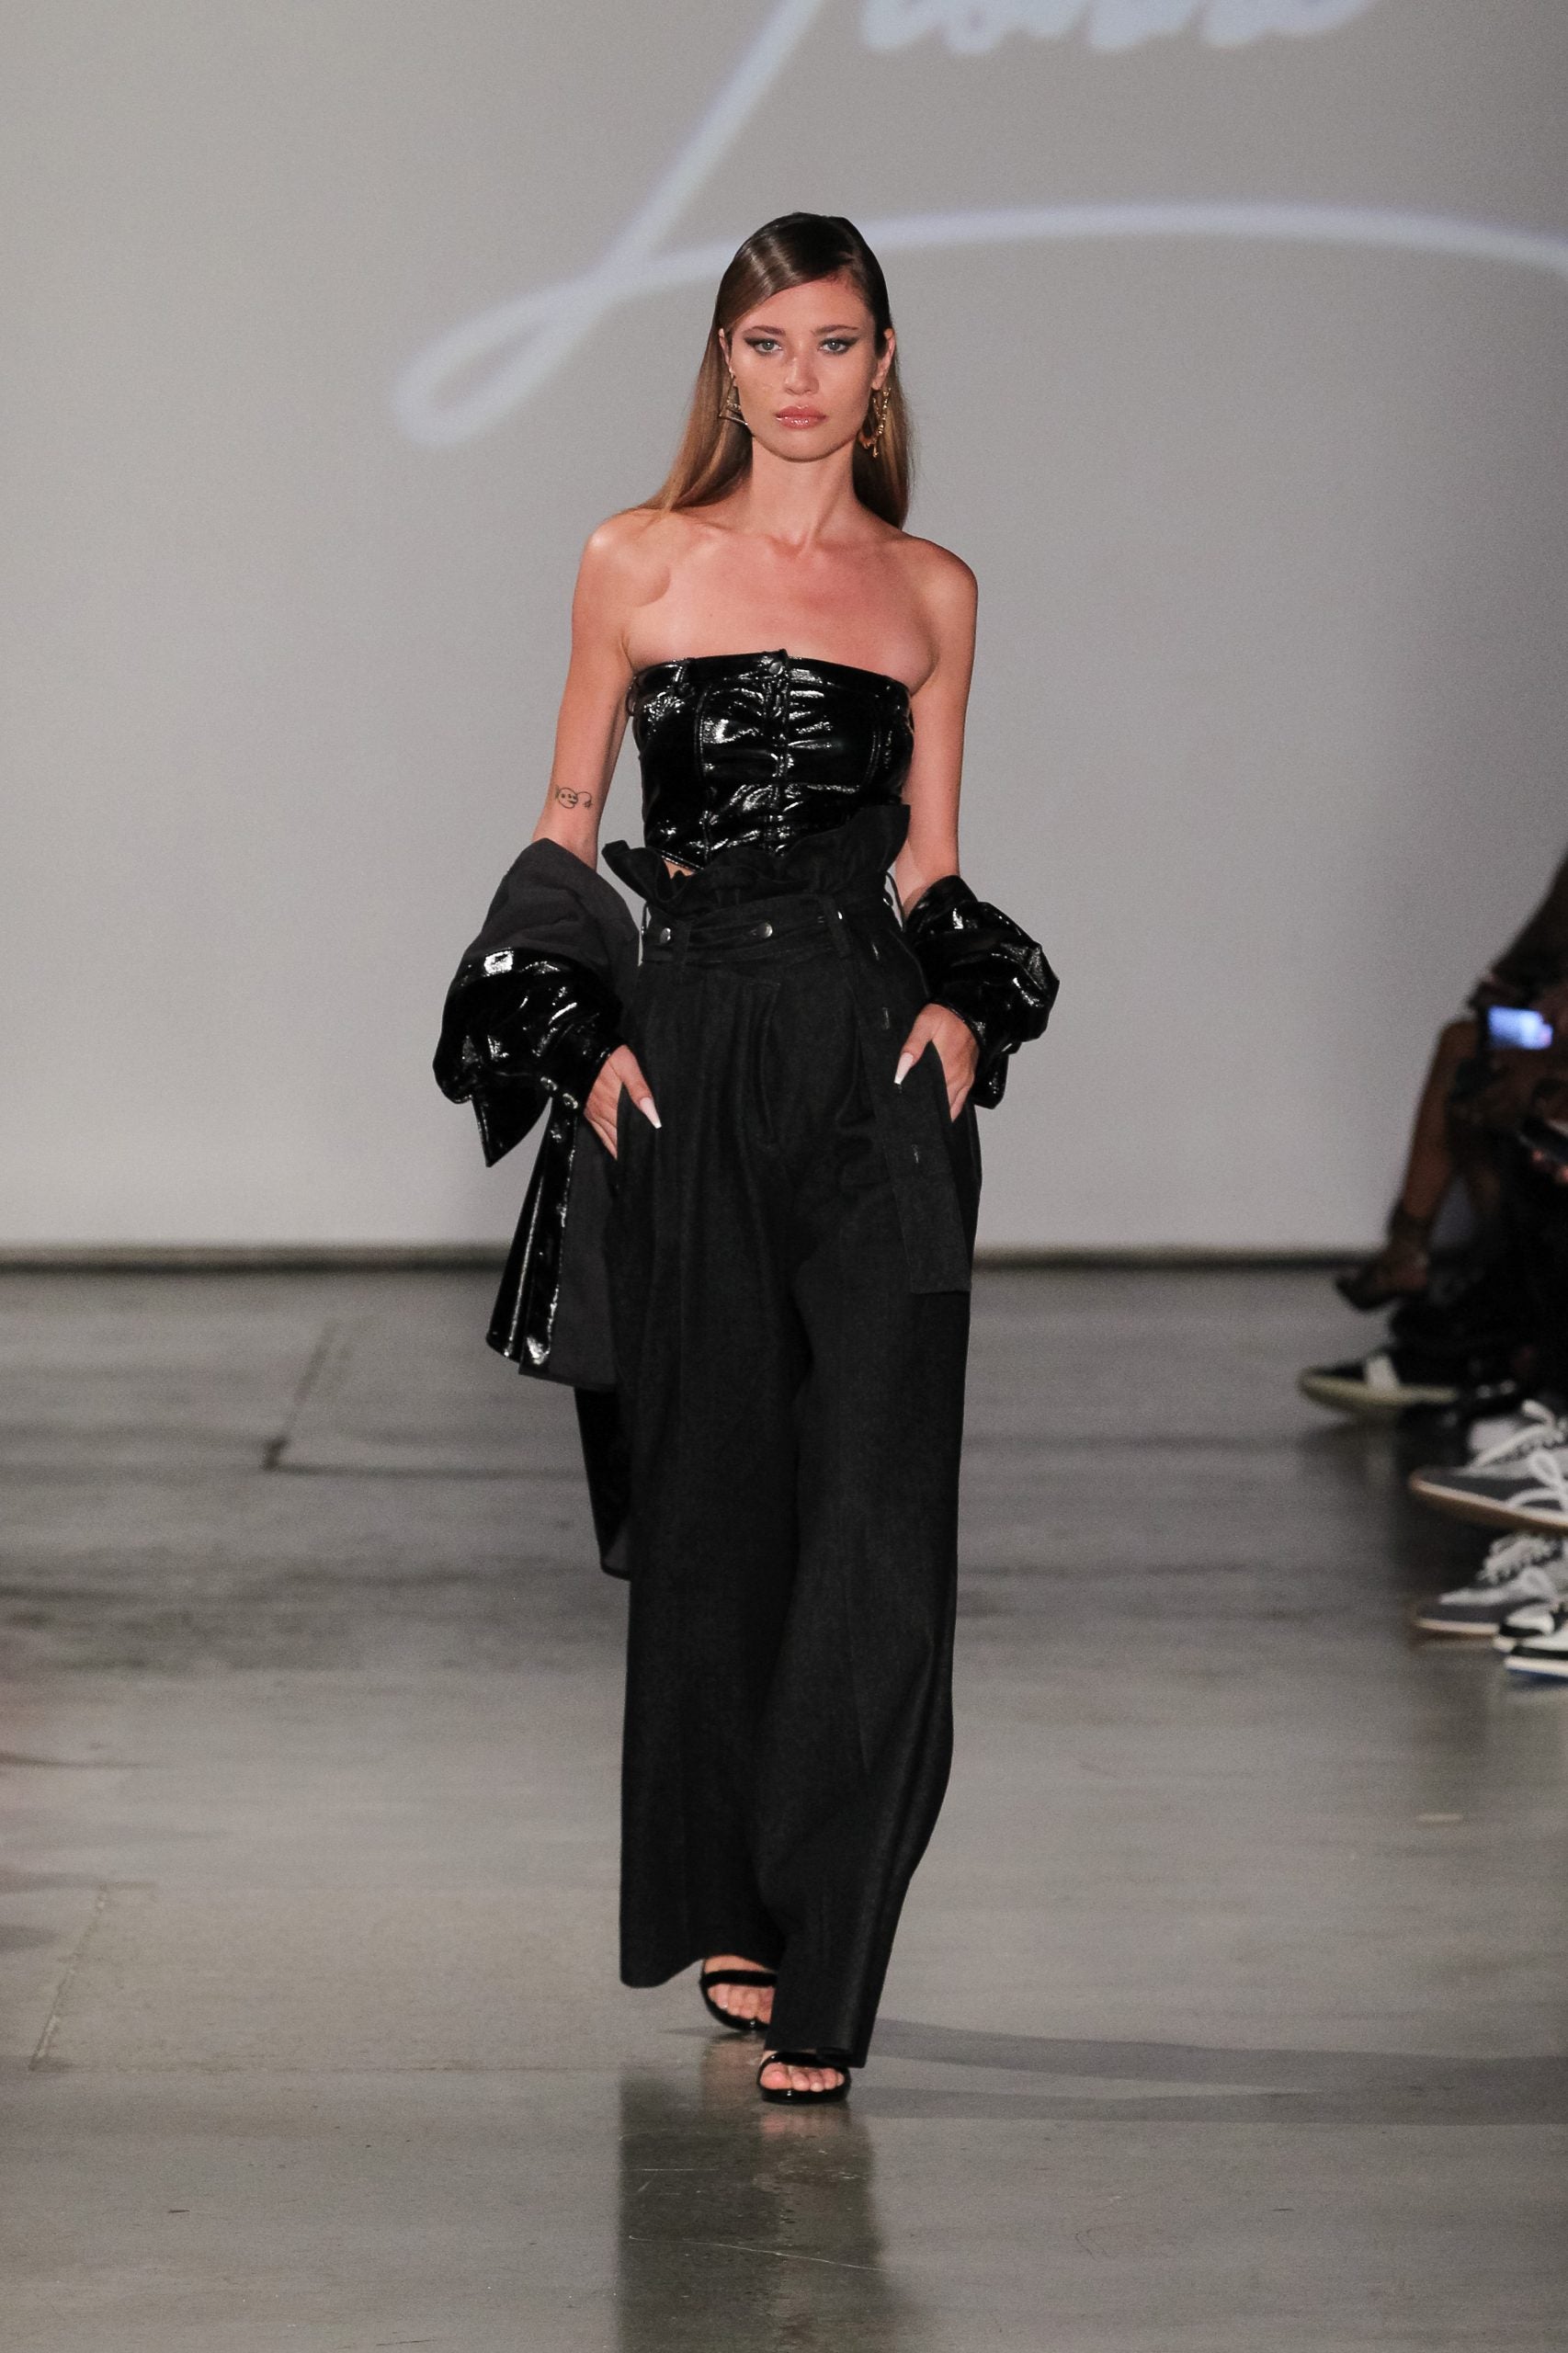 Lionne's New York Fashion Week Debut Brings The Brand Closer To Home